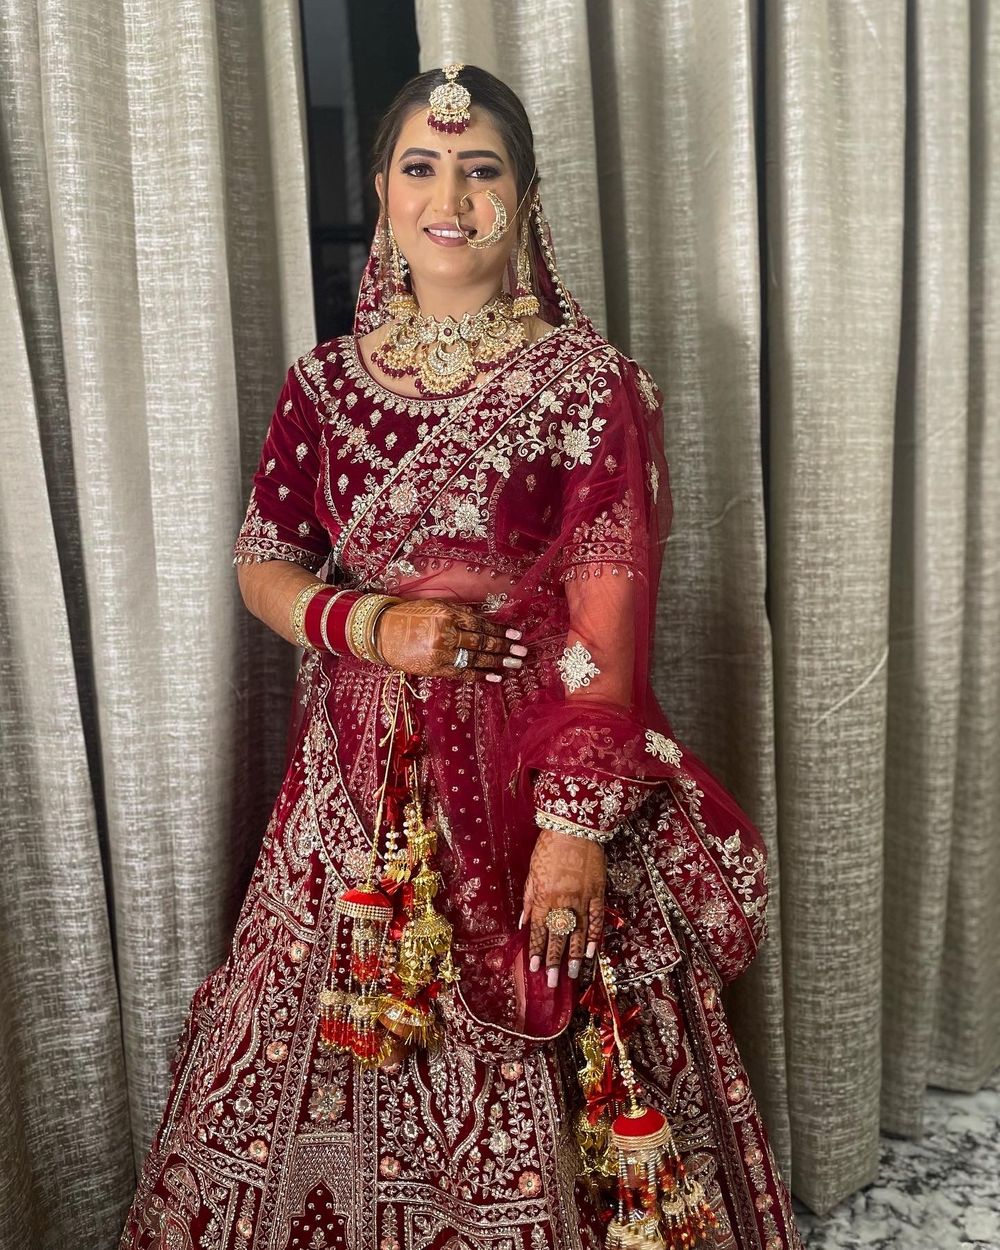 Photo From Brides - By Tanu Goyal Makeovers